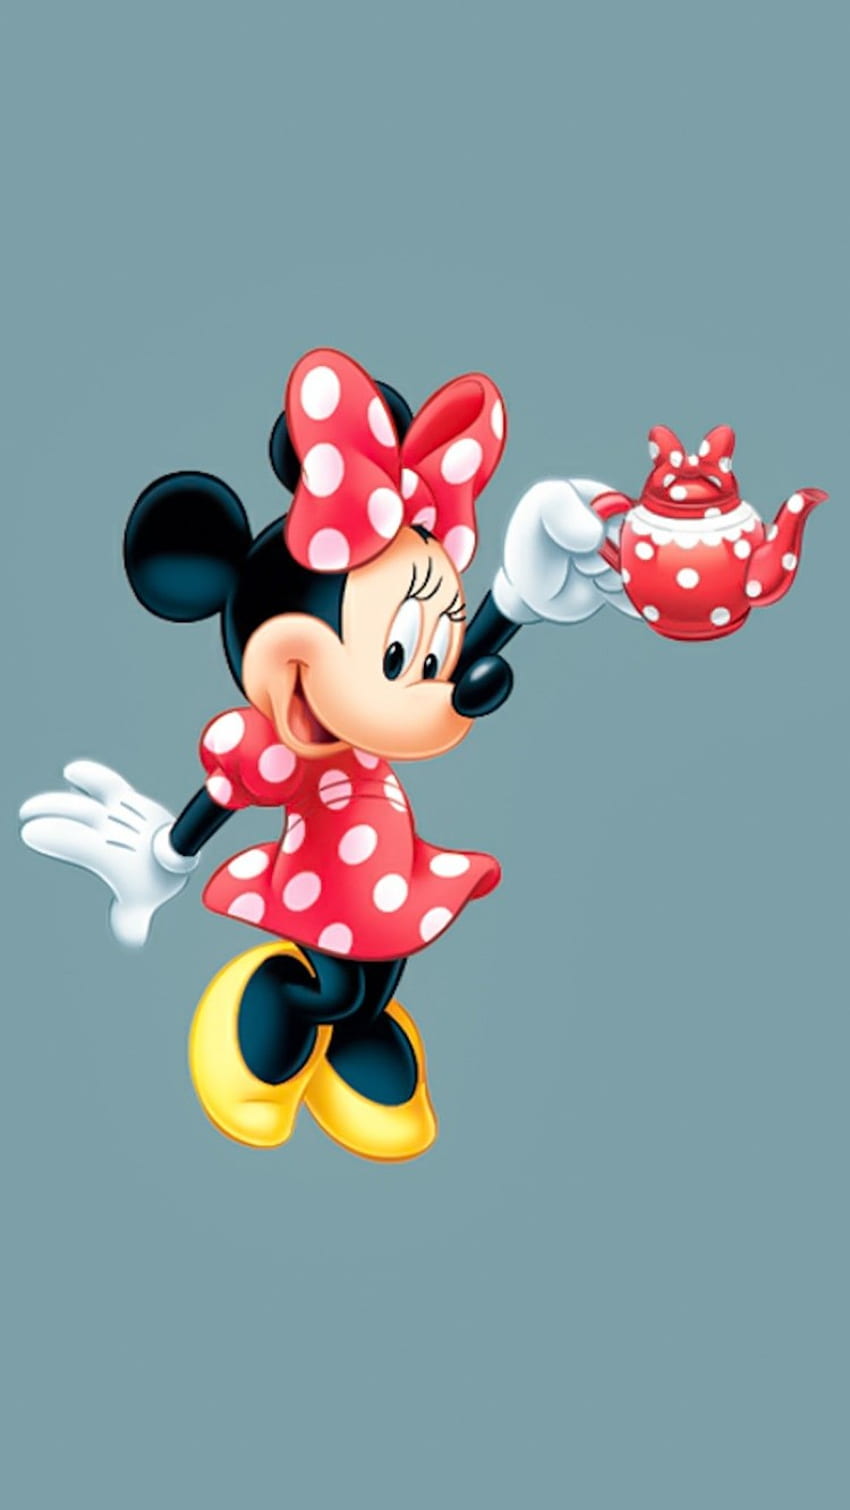 Mickey Mouse Disney Aesthetic : Minnie Mouse Red Polka Dot Dress - Idea , iPhone , Color Schemes, Red Mickey Mouse HD-Handy-Hintergrundbild